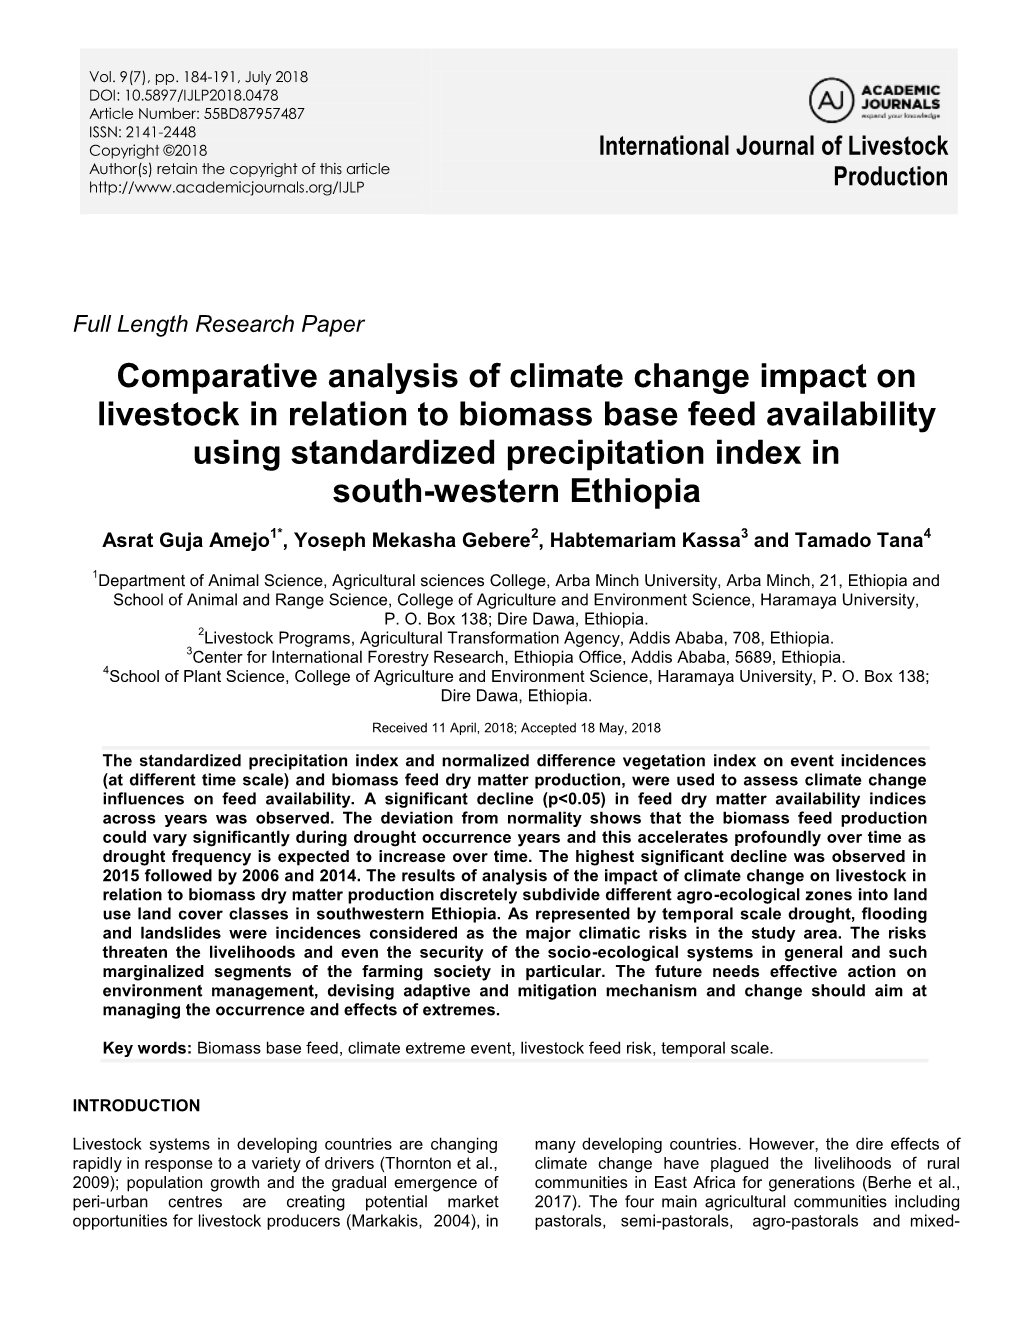 Comparative Analysis of Climate Change Impact on Livestock